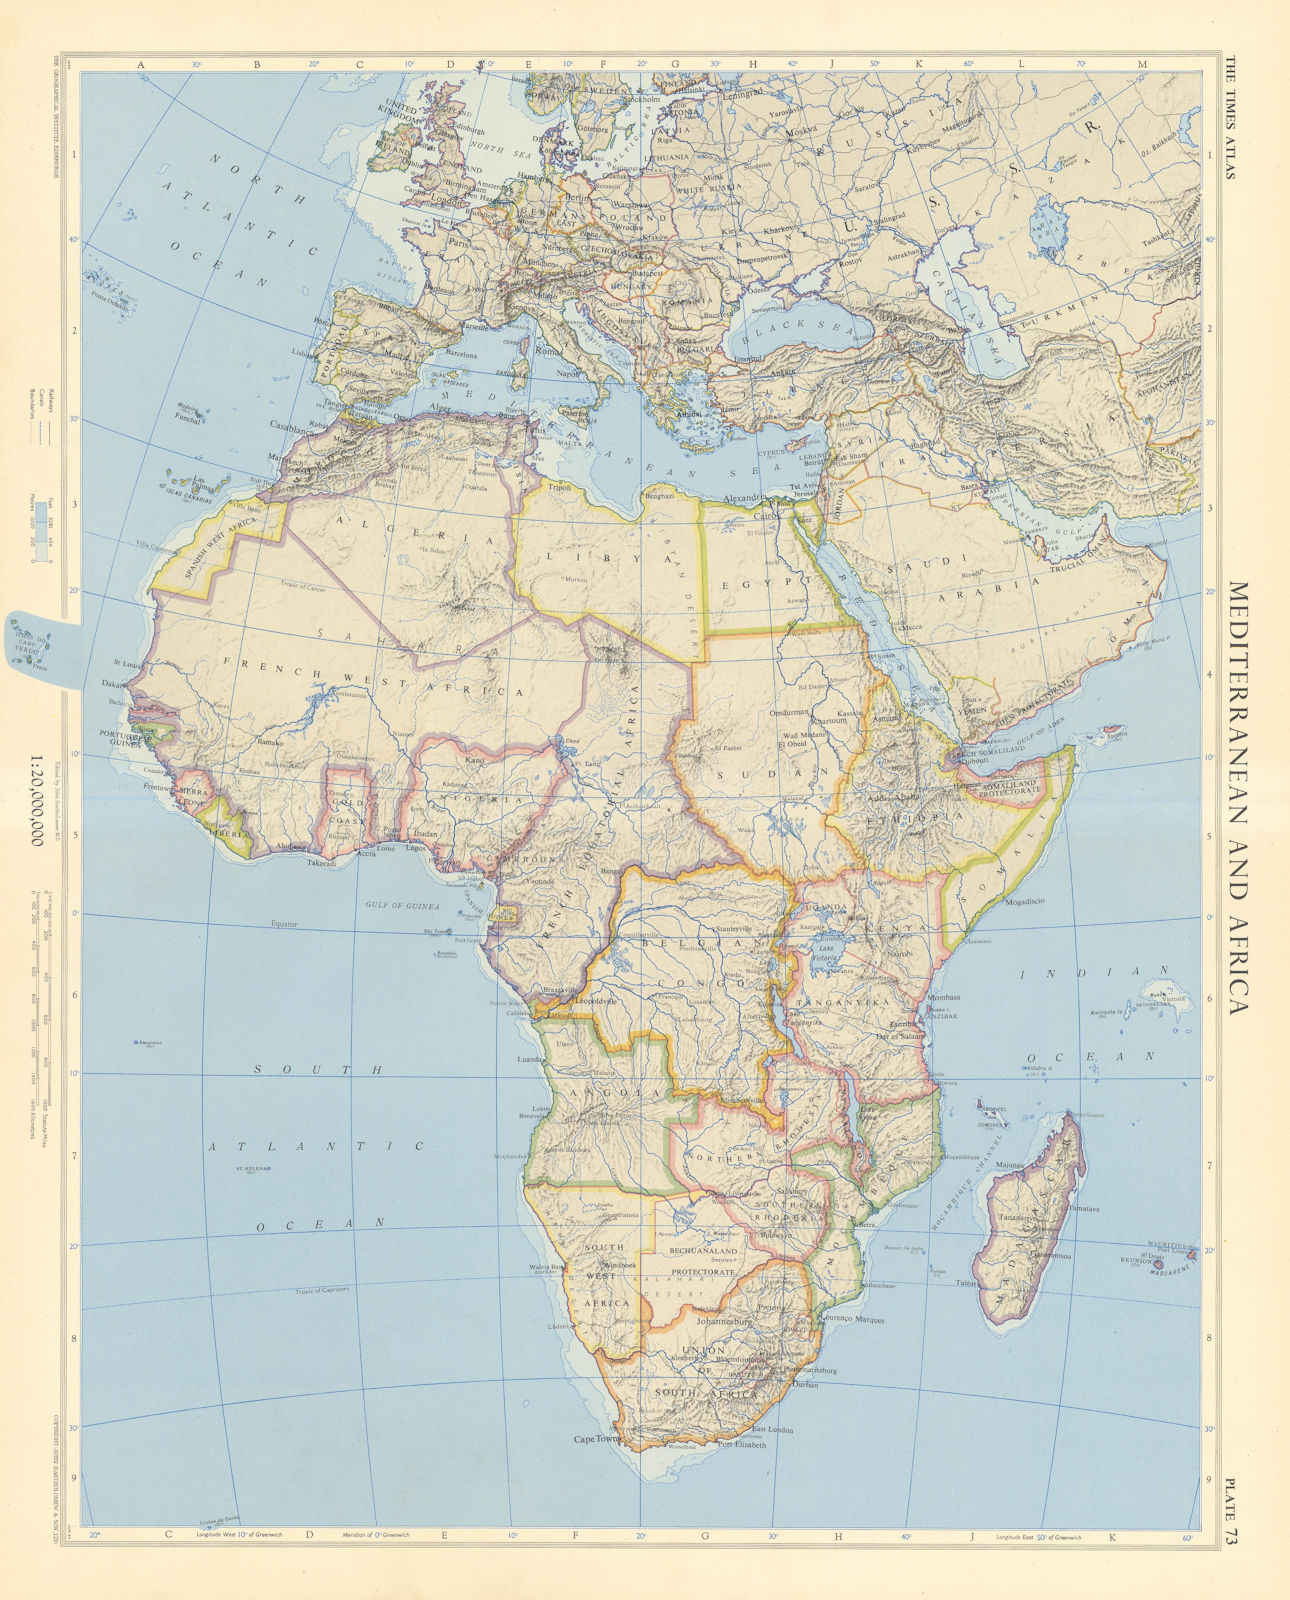 Africa. French Equatorial Africa. Rhodesia. Belgian Congo. TIMES 1956 old map